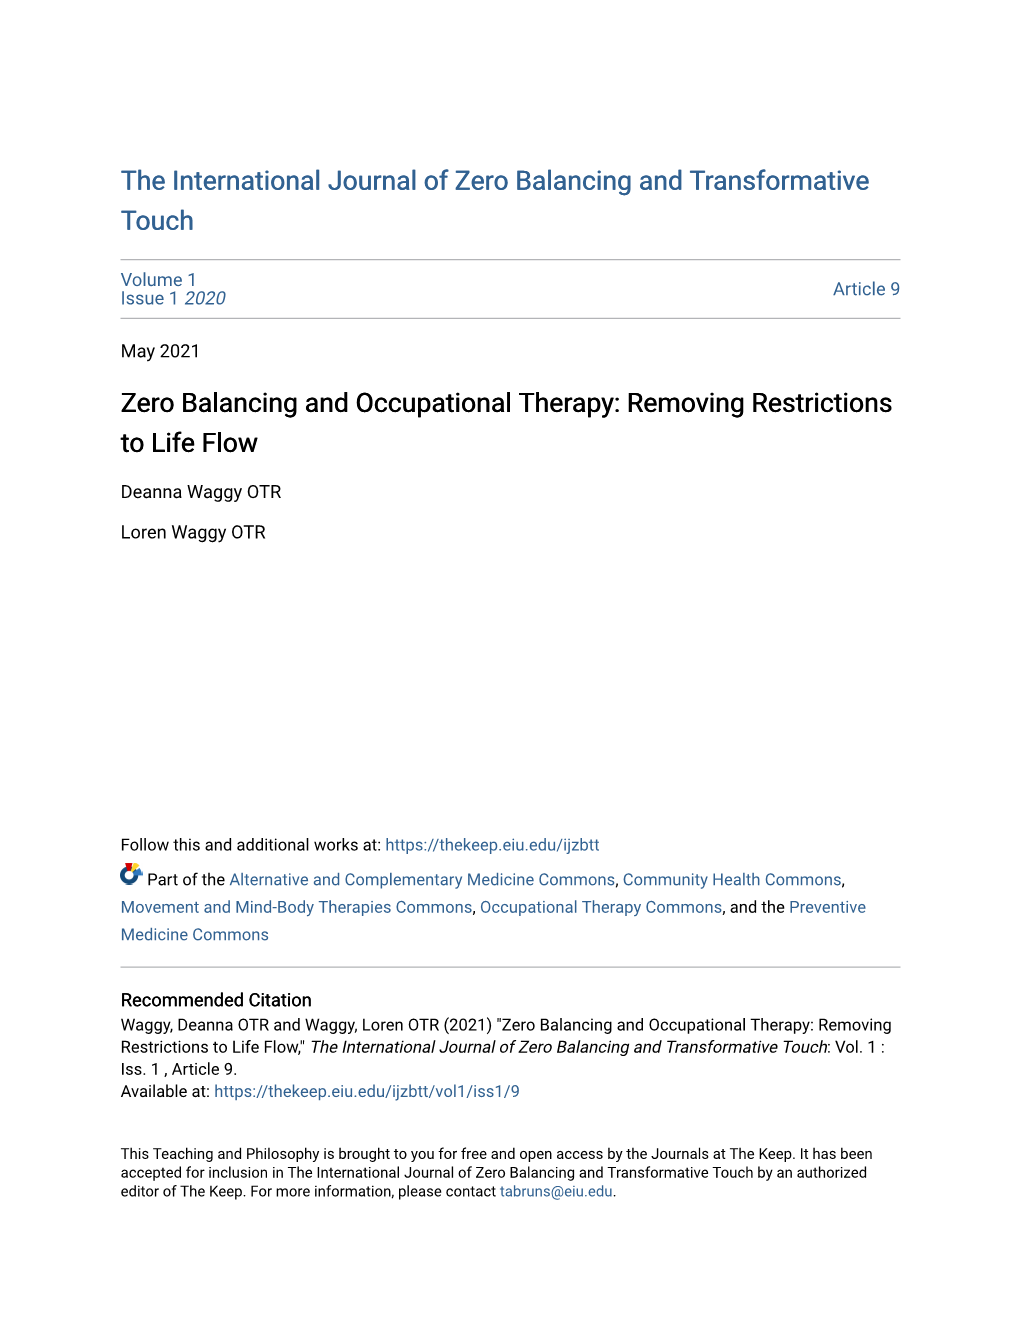 Zero Balancing and Occupational Therapy: Removing Restrictions to Life Flow